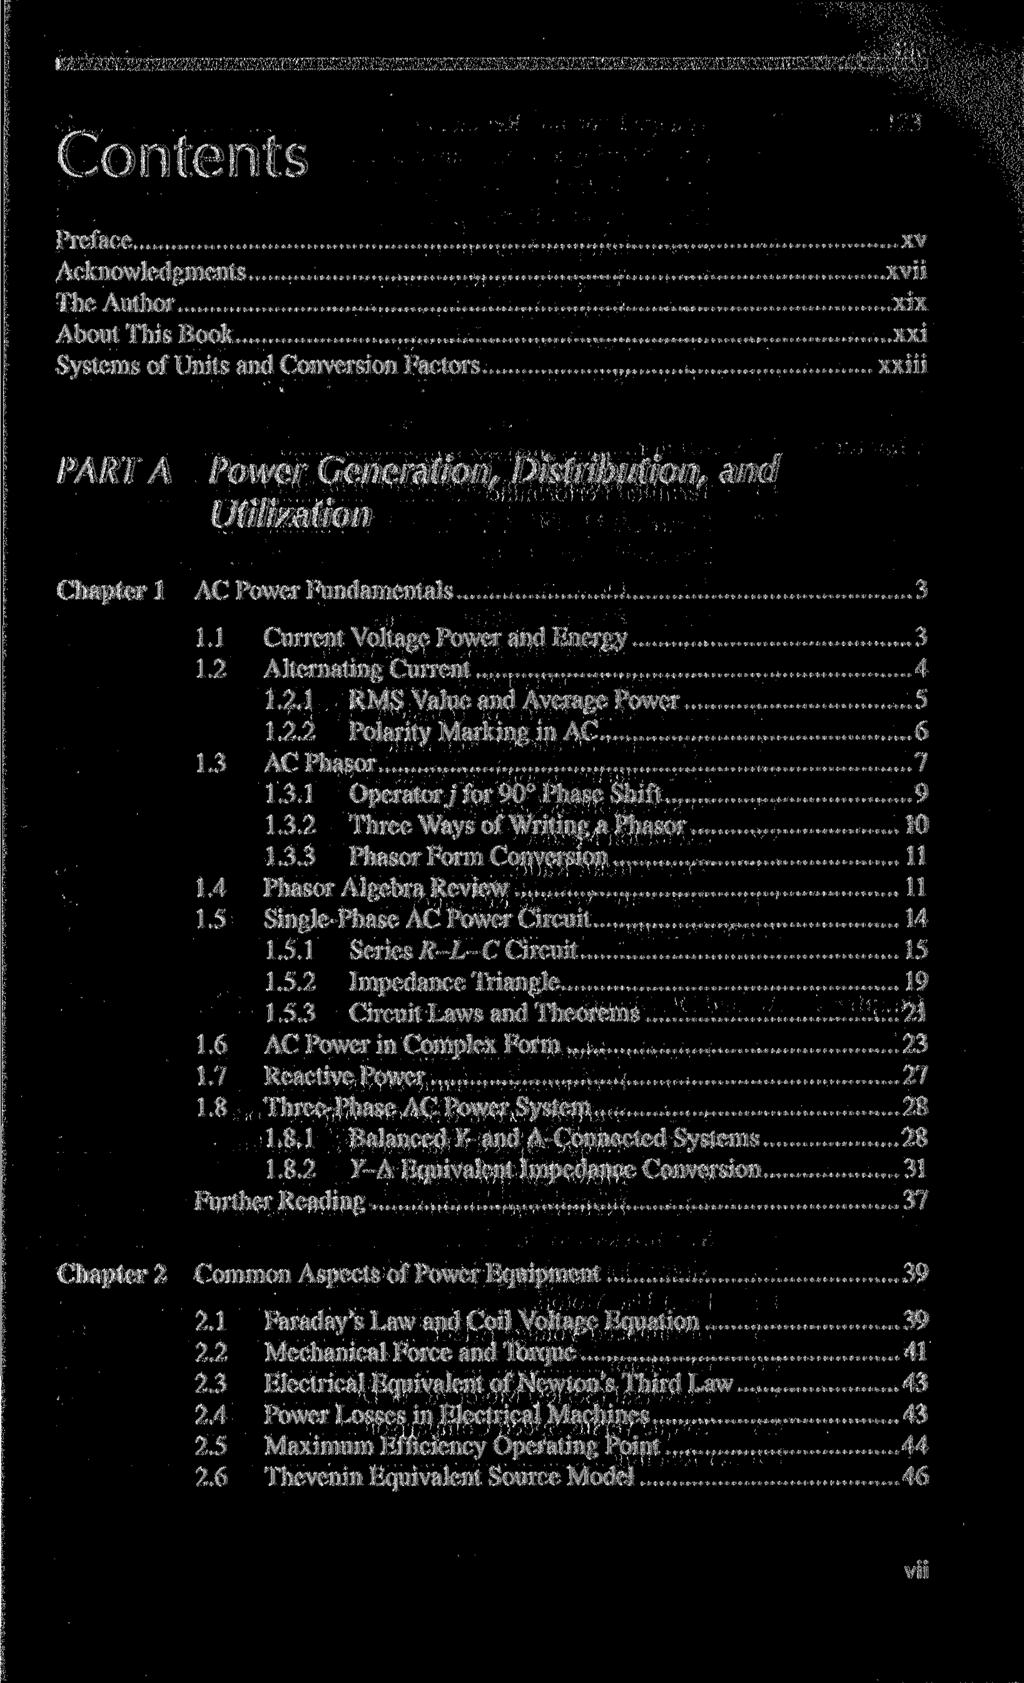 Contents Preface Acknowledgments The Author About This Book Systems of Units and Conversion Factors xv xvii xix xxi xxiii PART A Power Generation, Distribution, and Utilization Chapter 1 AC Power